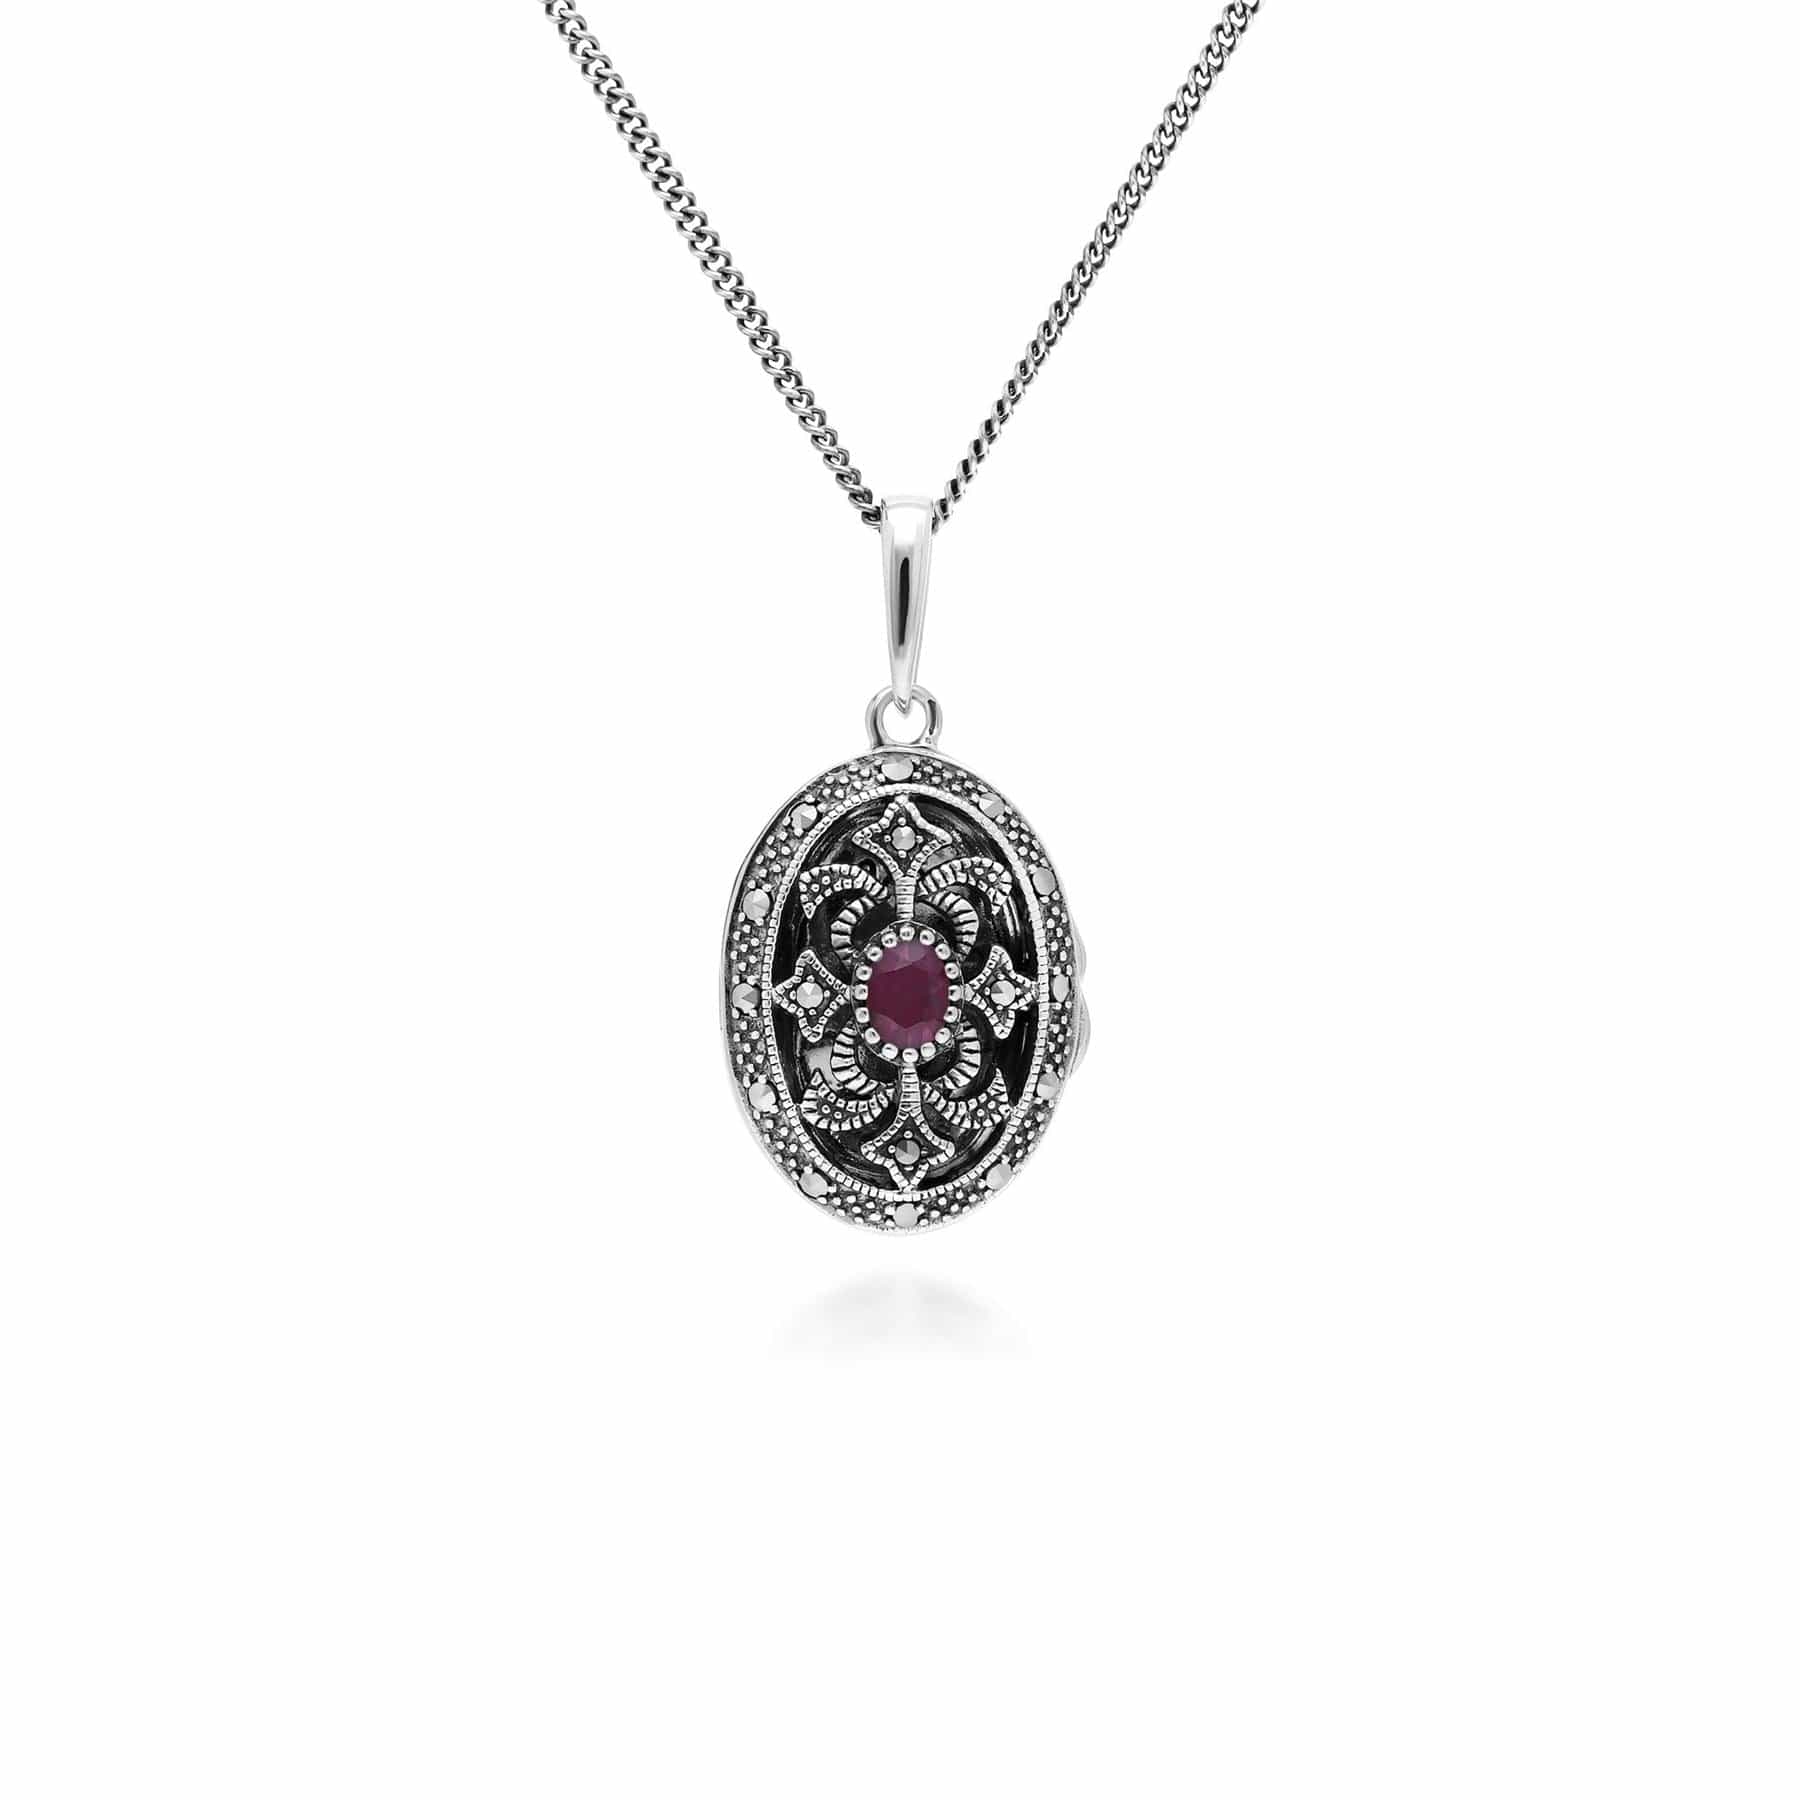 214N716202925 Art Nouveau Style Oval Ruby & Marcasite Locket Necklace in 925 Sterling Silver 1